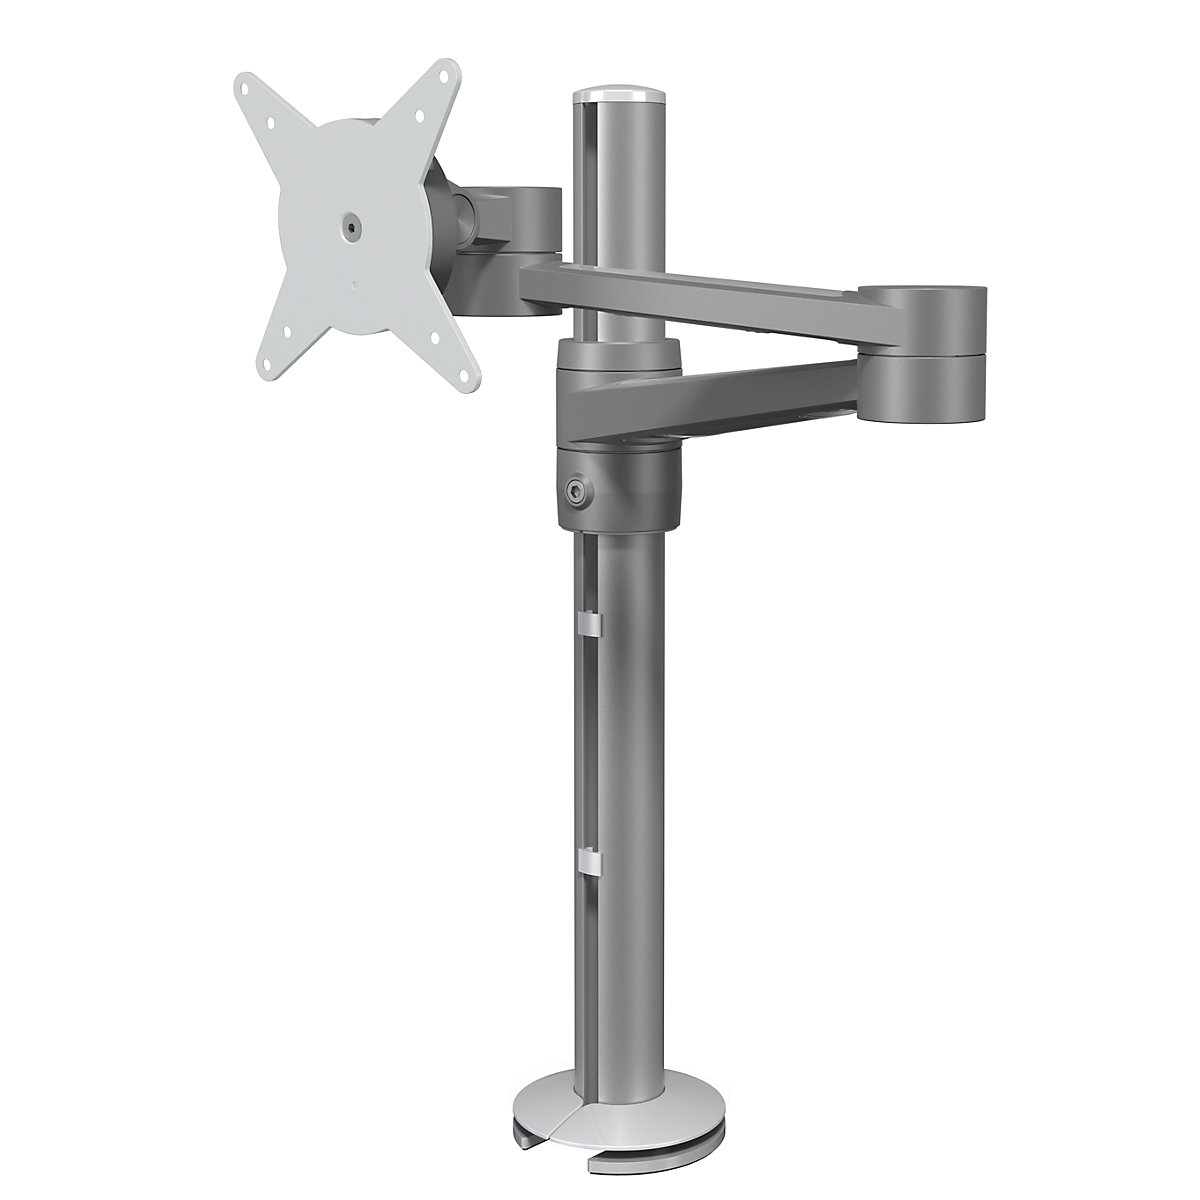 VIEWLITE monitor arm – Dataflex, height adjustable, two stabilising arms, silver/white-4